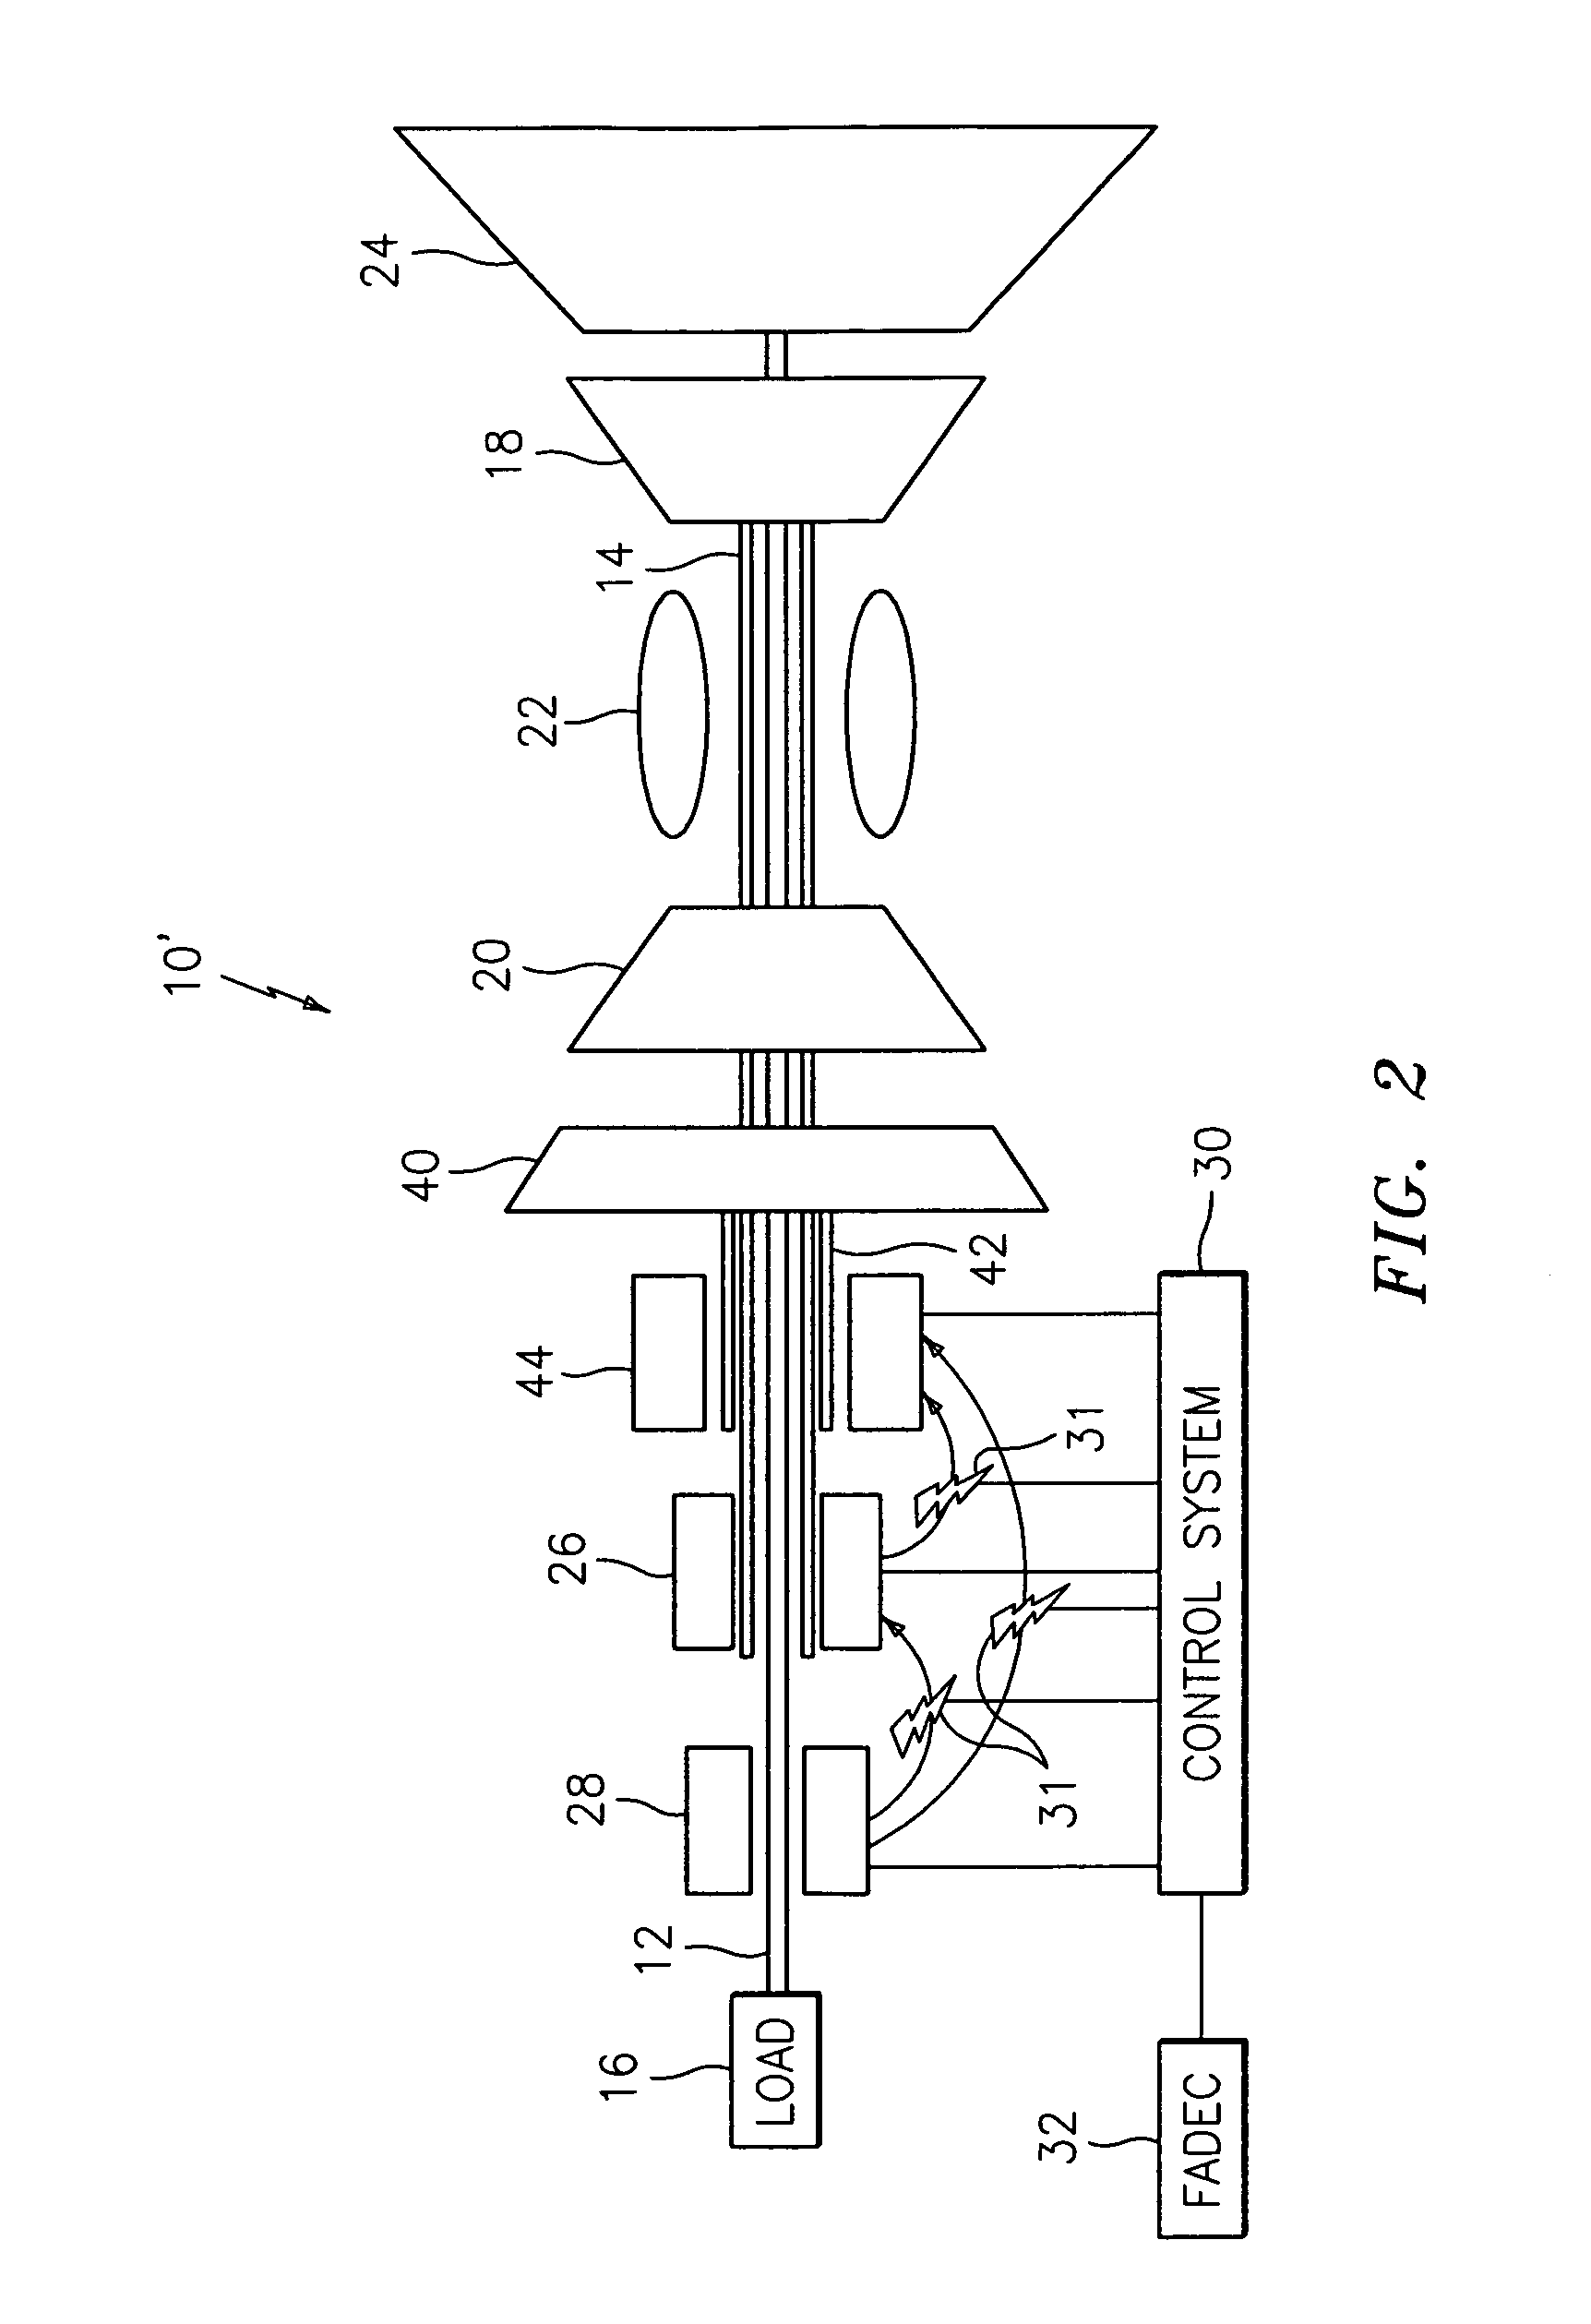 Electrically coupled supercharger for a gas turbine engine